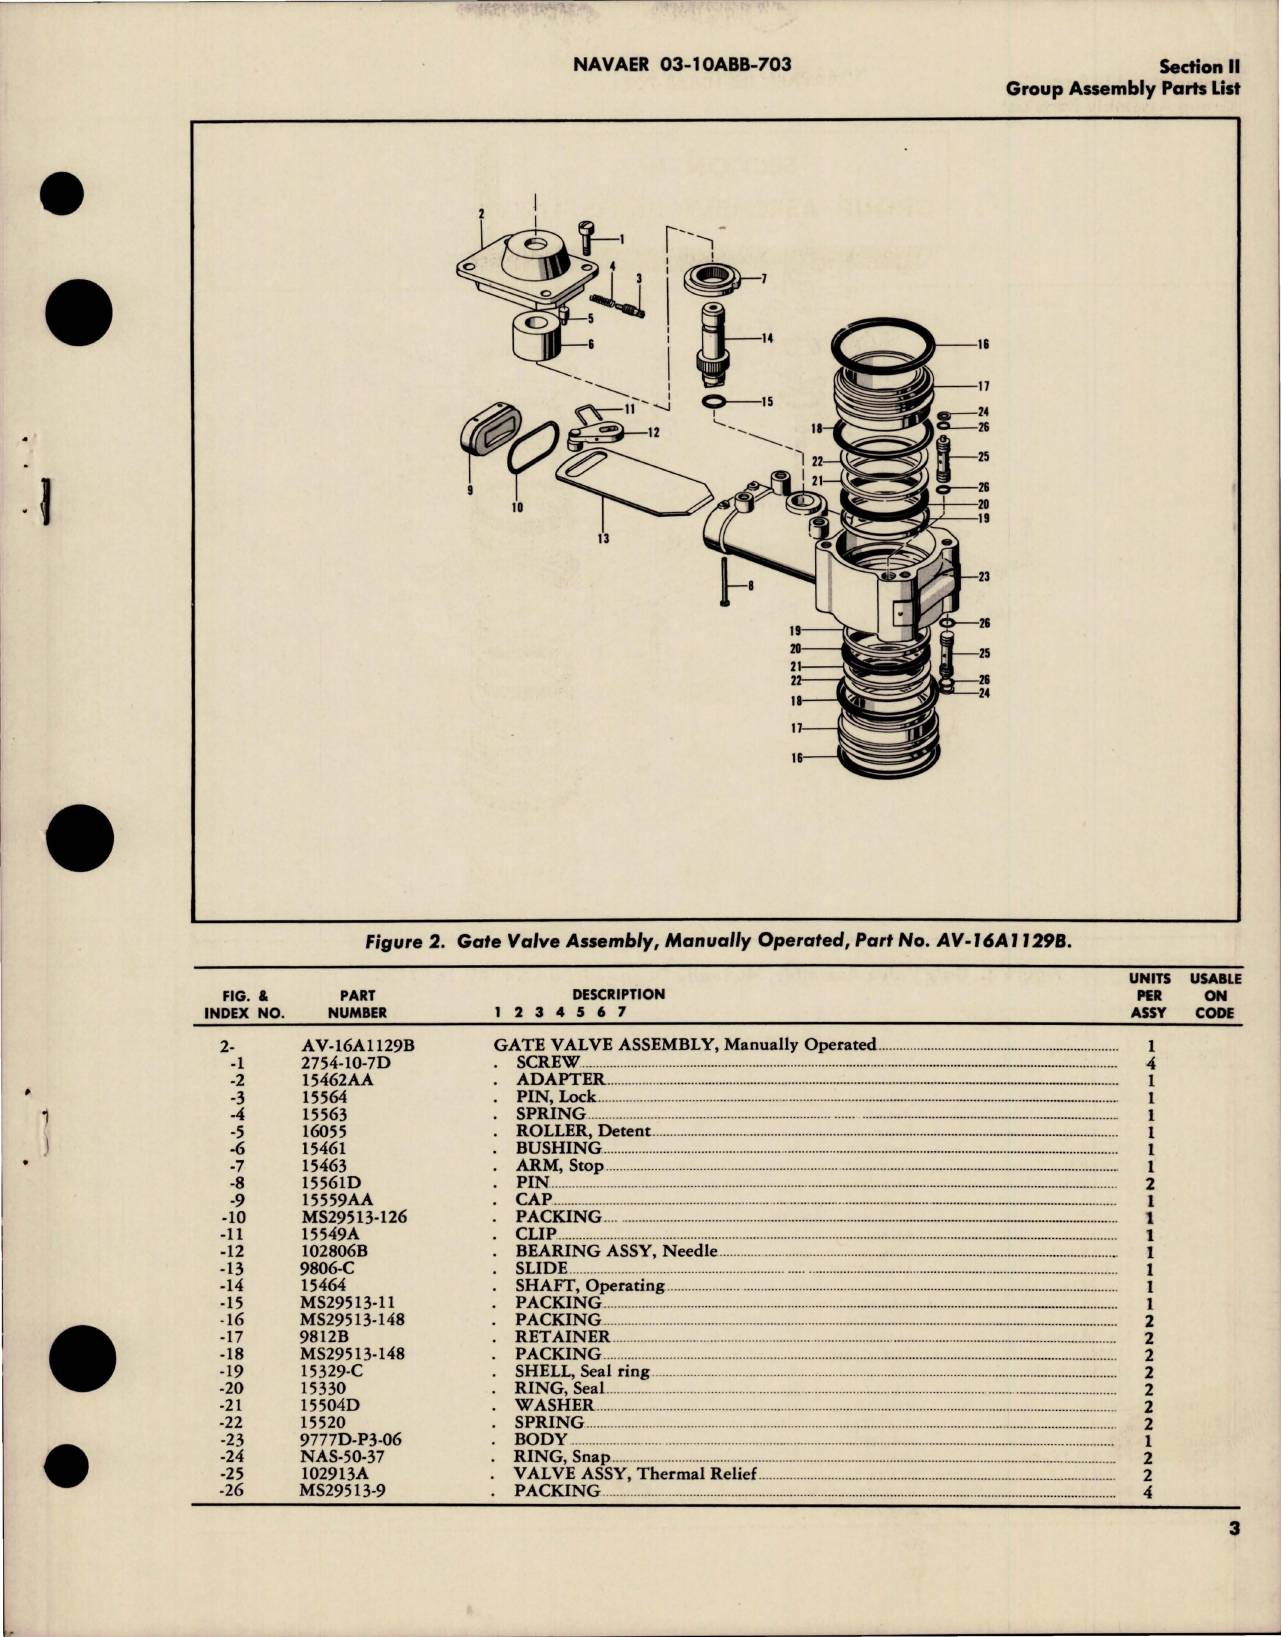 Sample page 5 from AirCorps Library document: Parts Breakdown for Manually Operated Gate Valve - AV-16A Series - Part AV-16A1134 